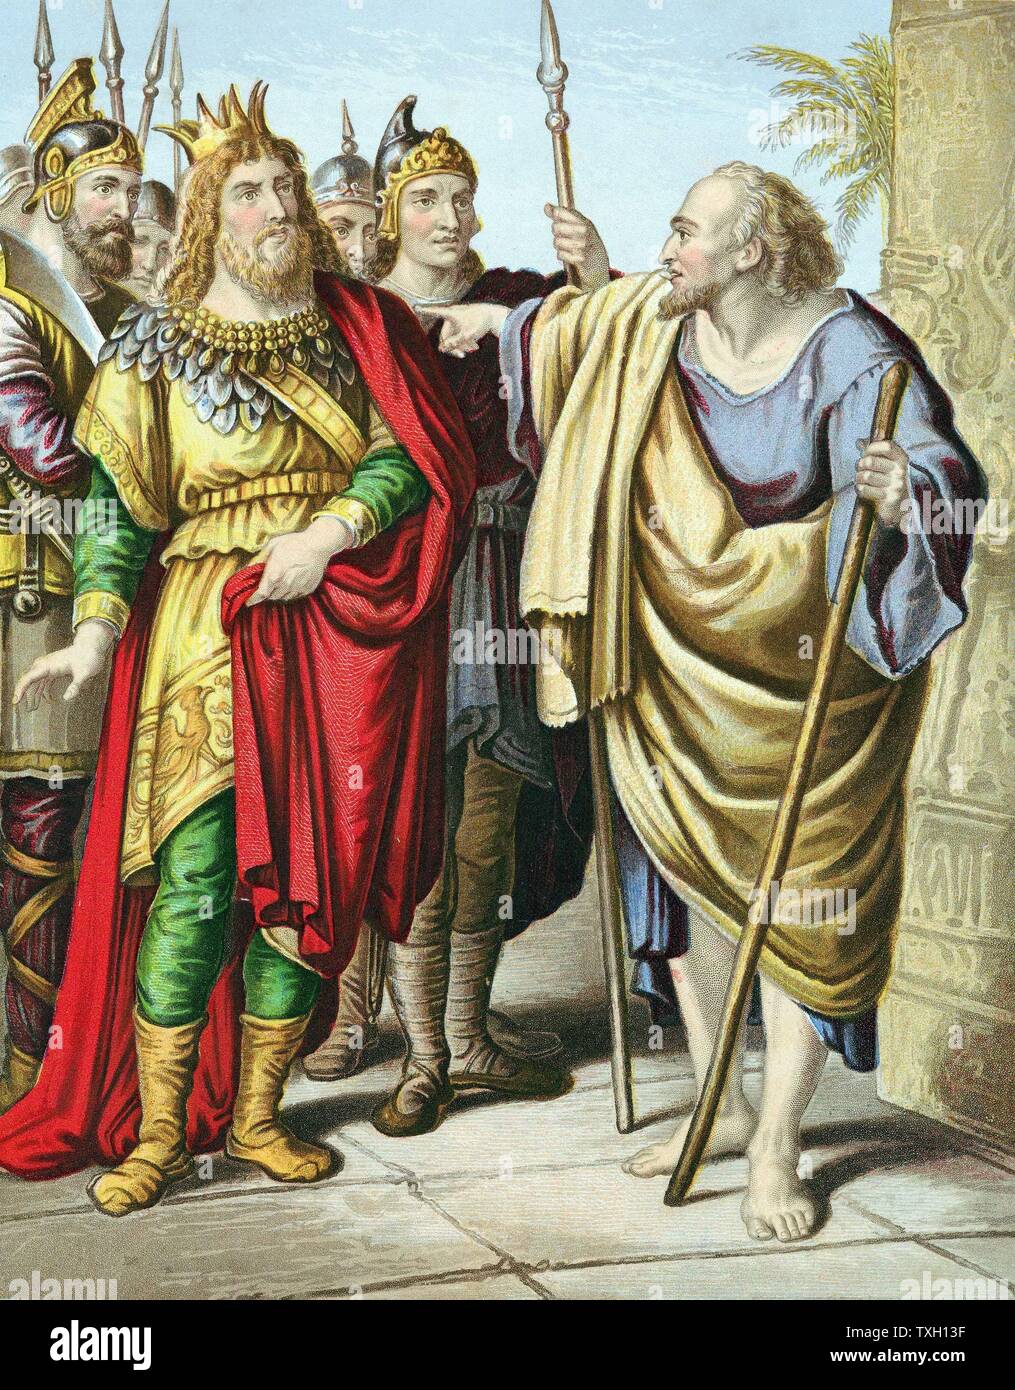 Elijah, Old Testament prophet, rebuking Ahab for forsaking the Lord for the god Baal. 'Bible' I Kings 18. Mid-19th century chromolithograph Stock Photo